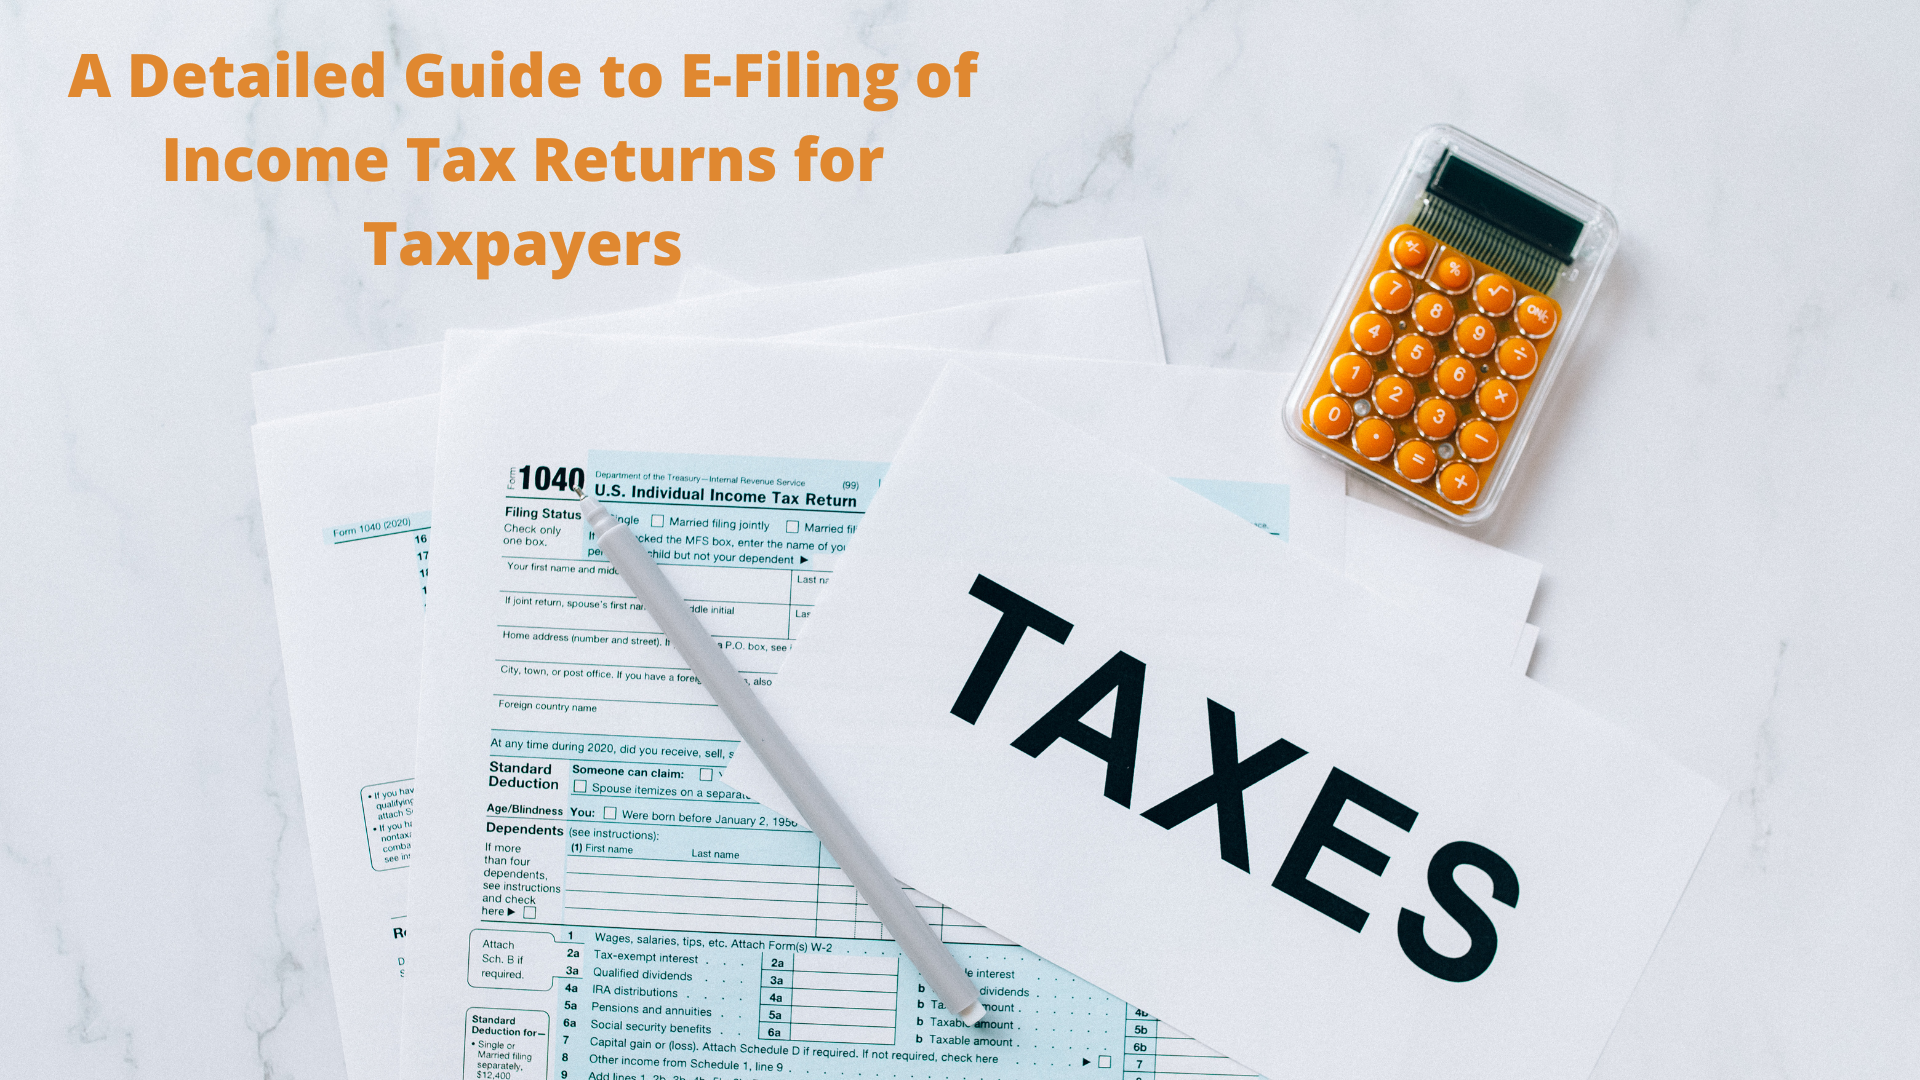 A Detailed Guide to E-Filing of Income Tax Returns for Taxpayers